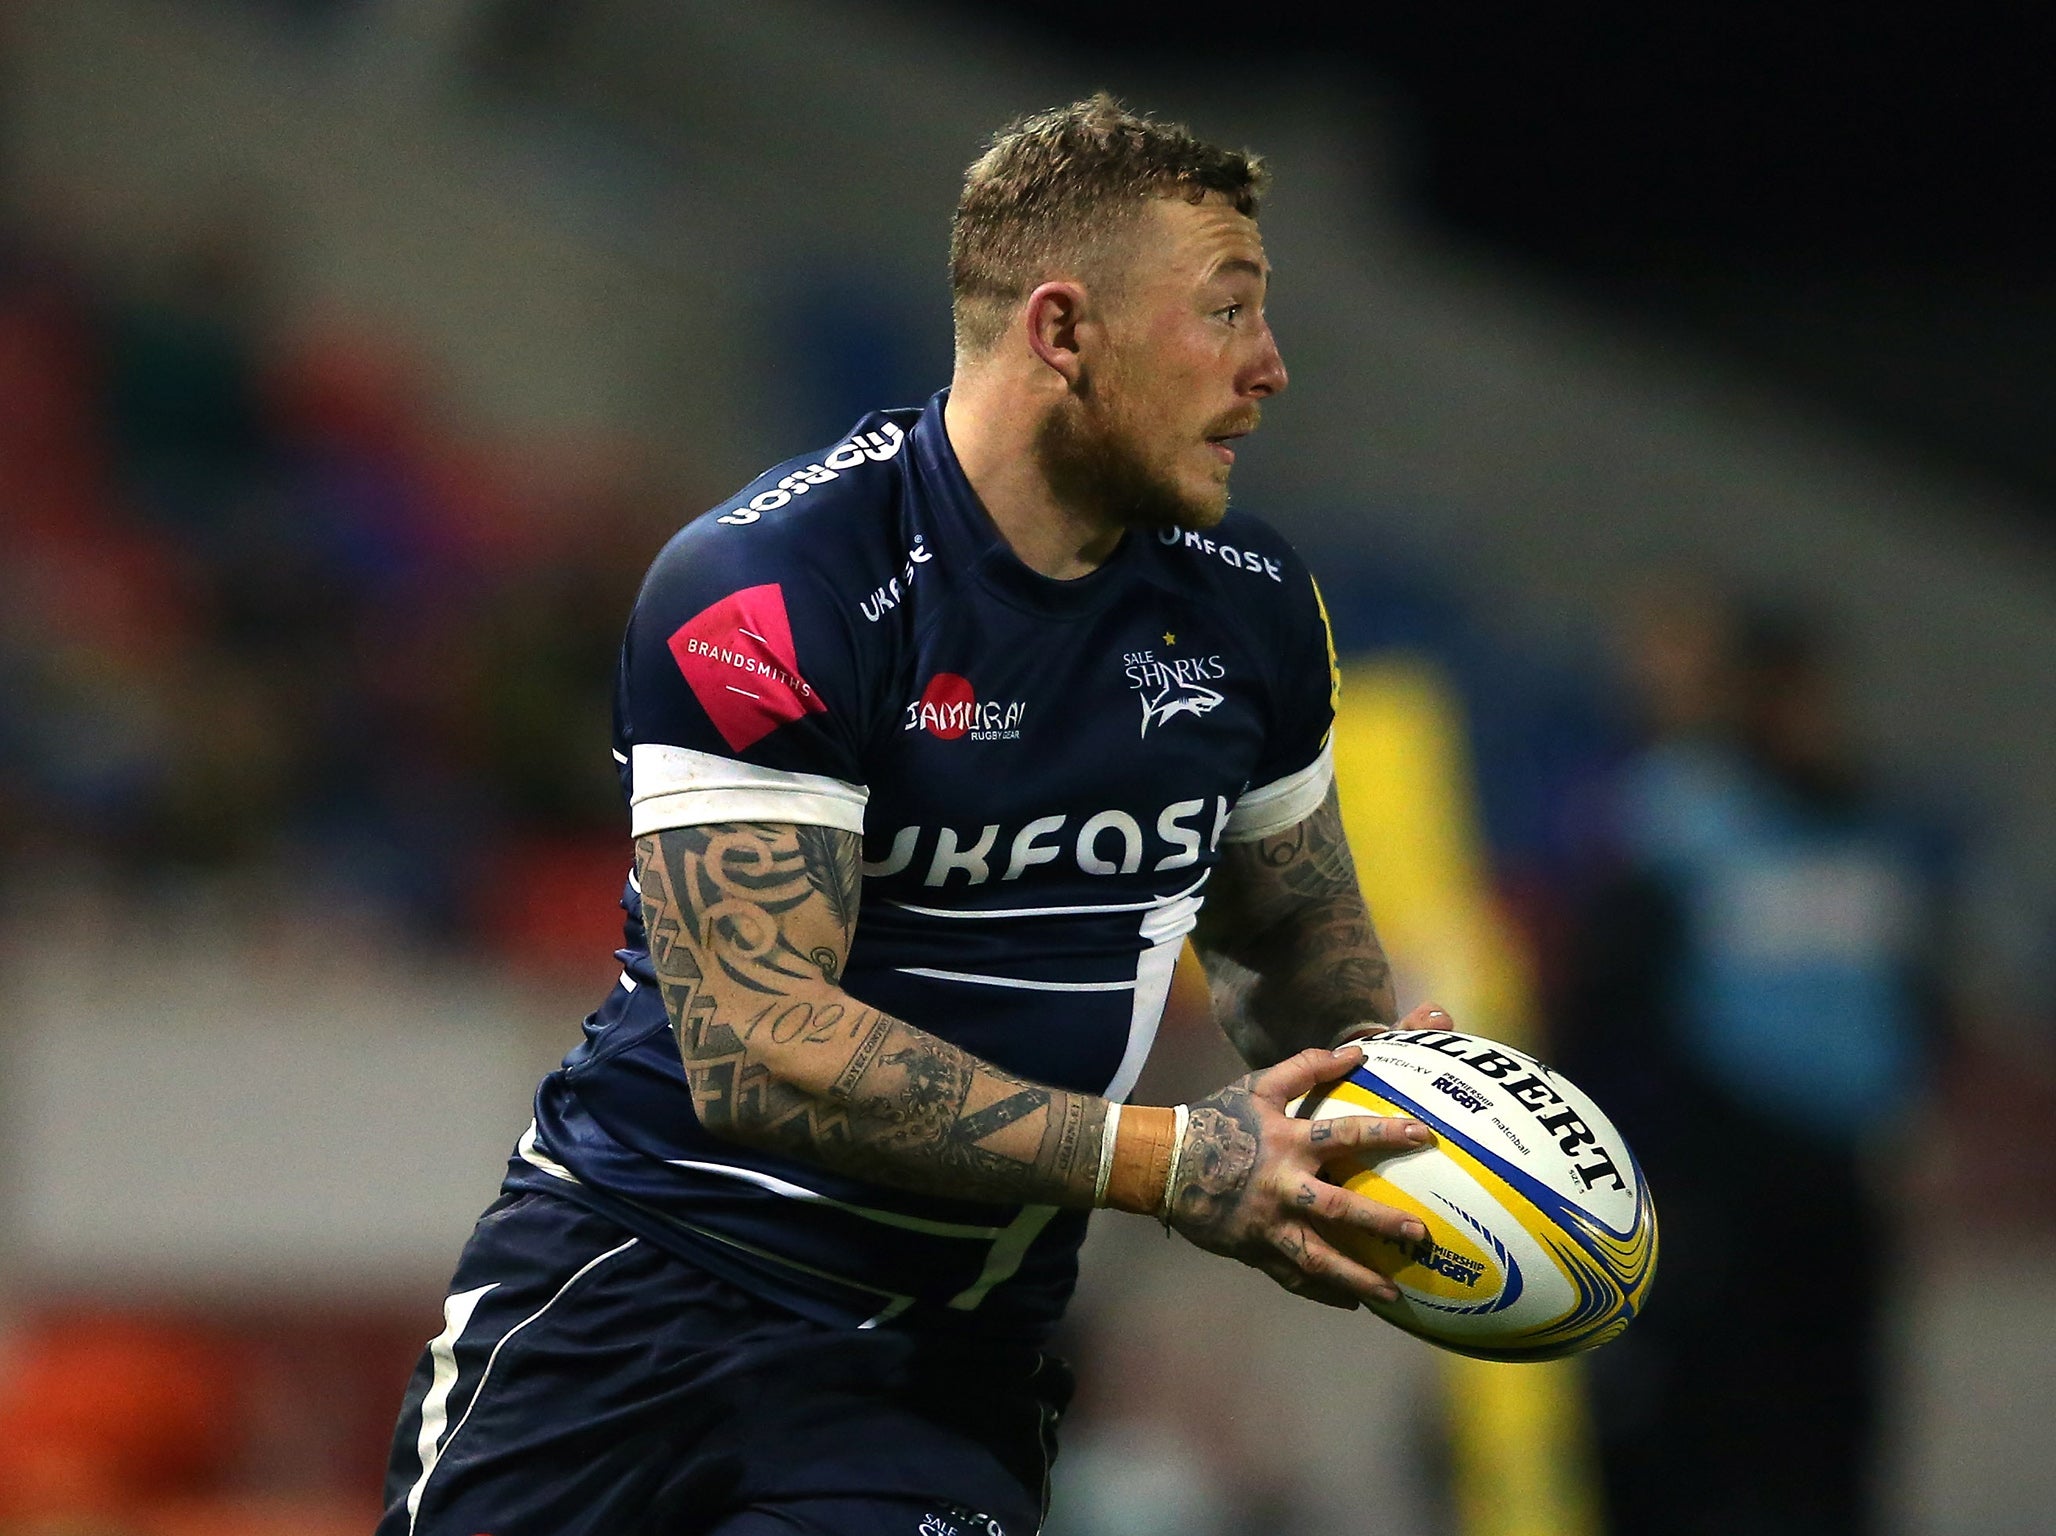 Josh Charnley made 32 appearances for Sale